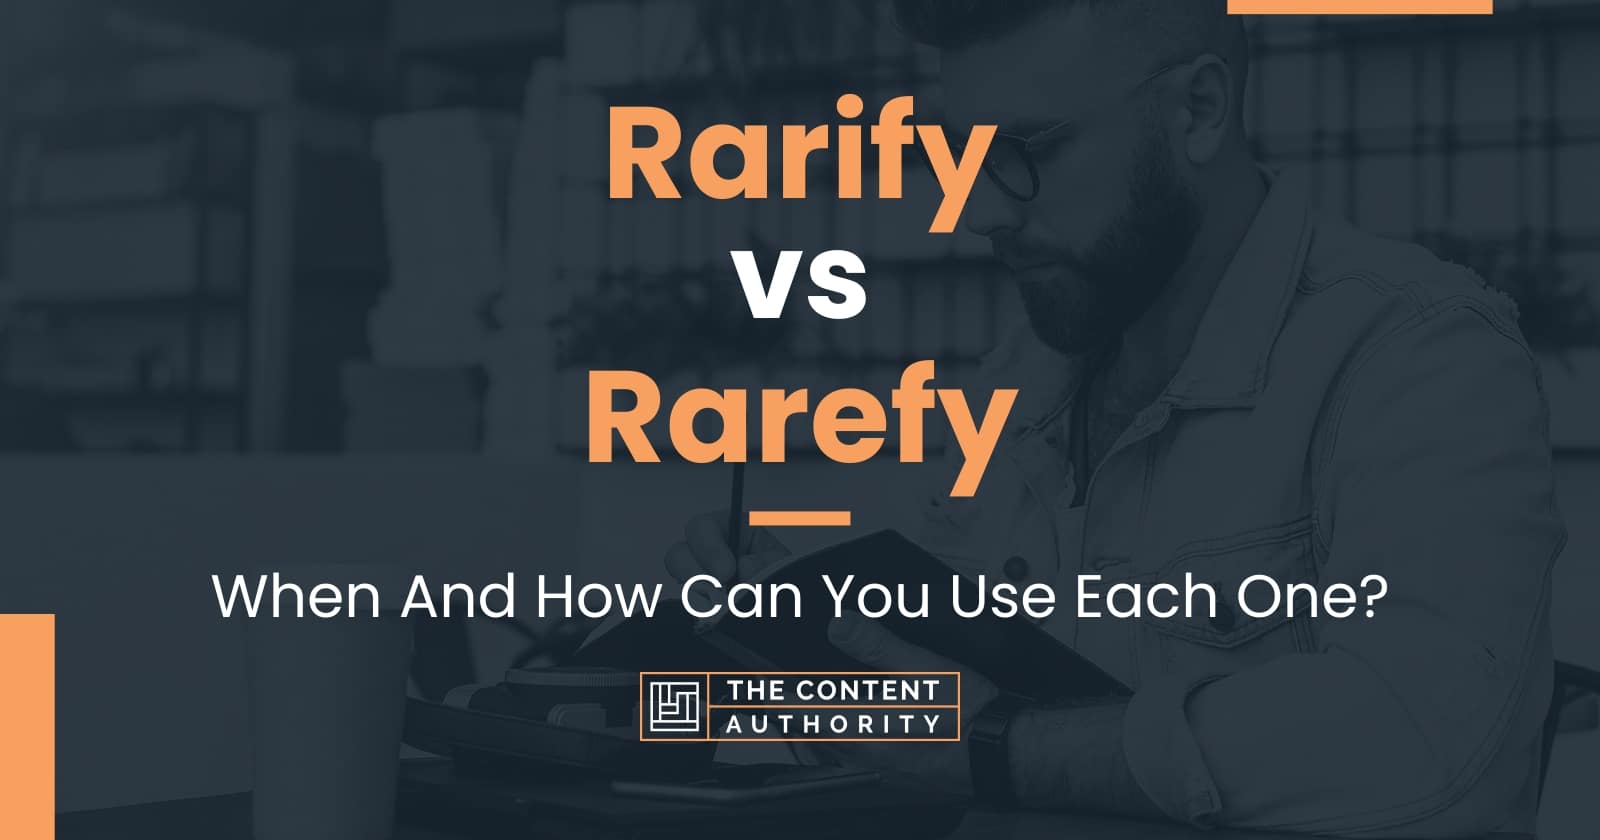 rarify meaning